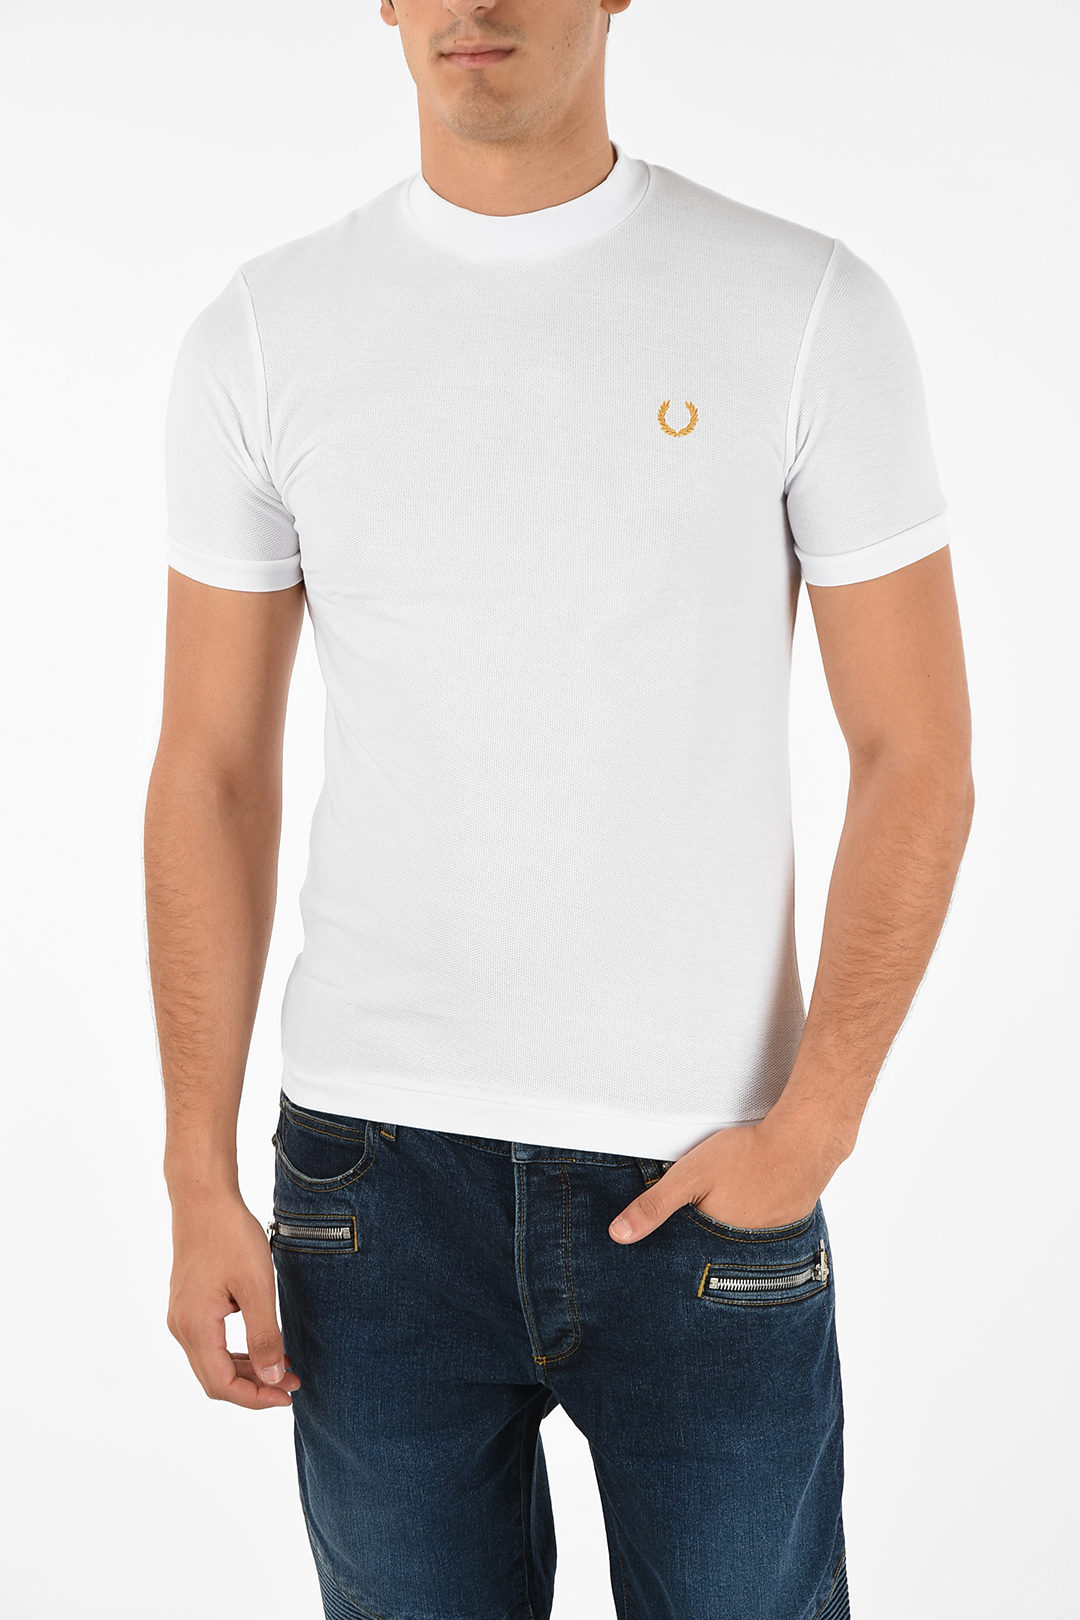 miles kane fred perry t shirt